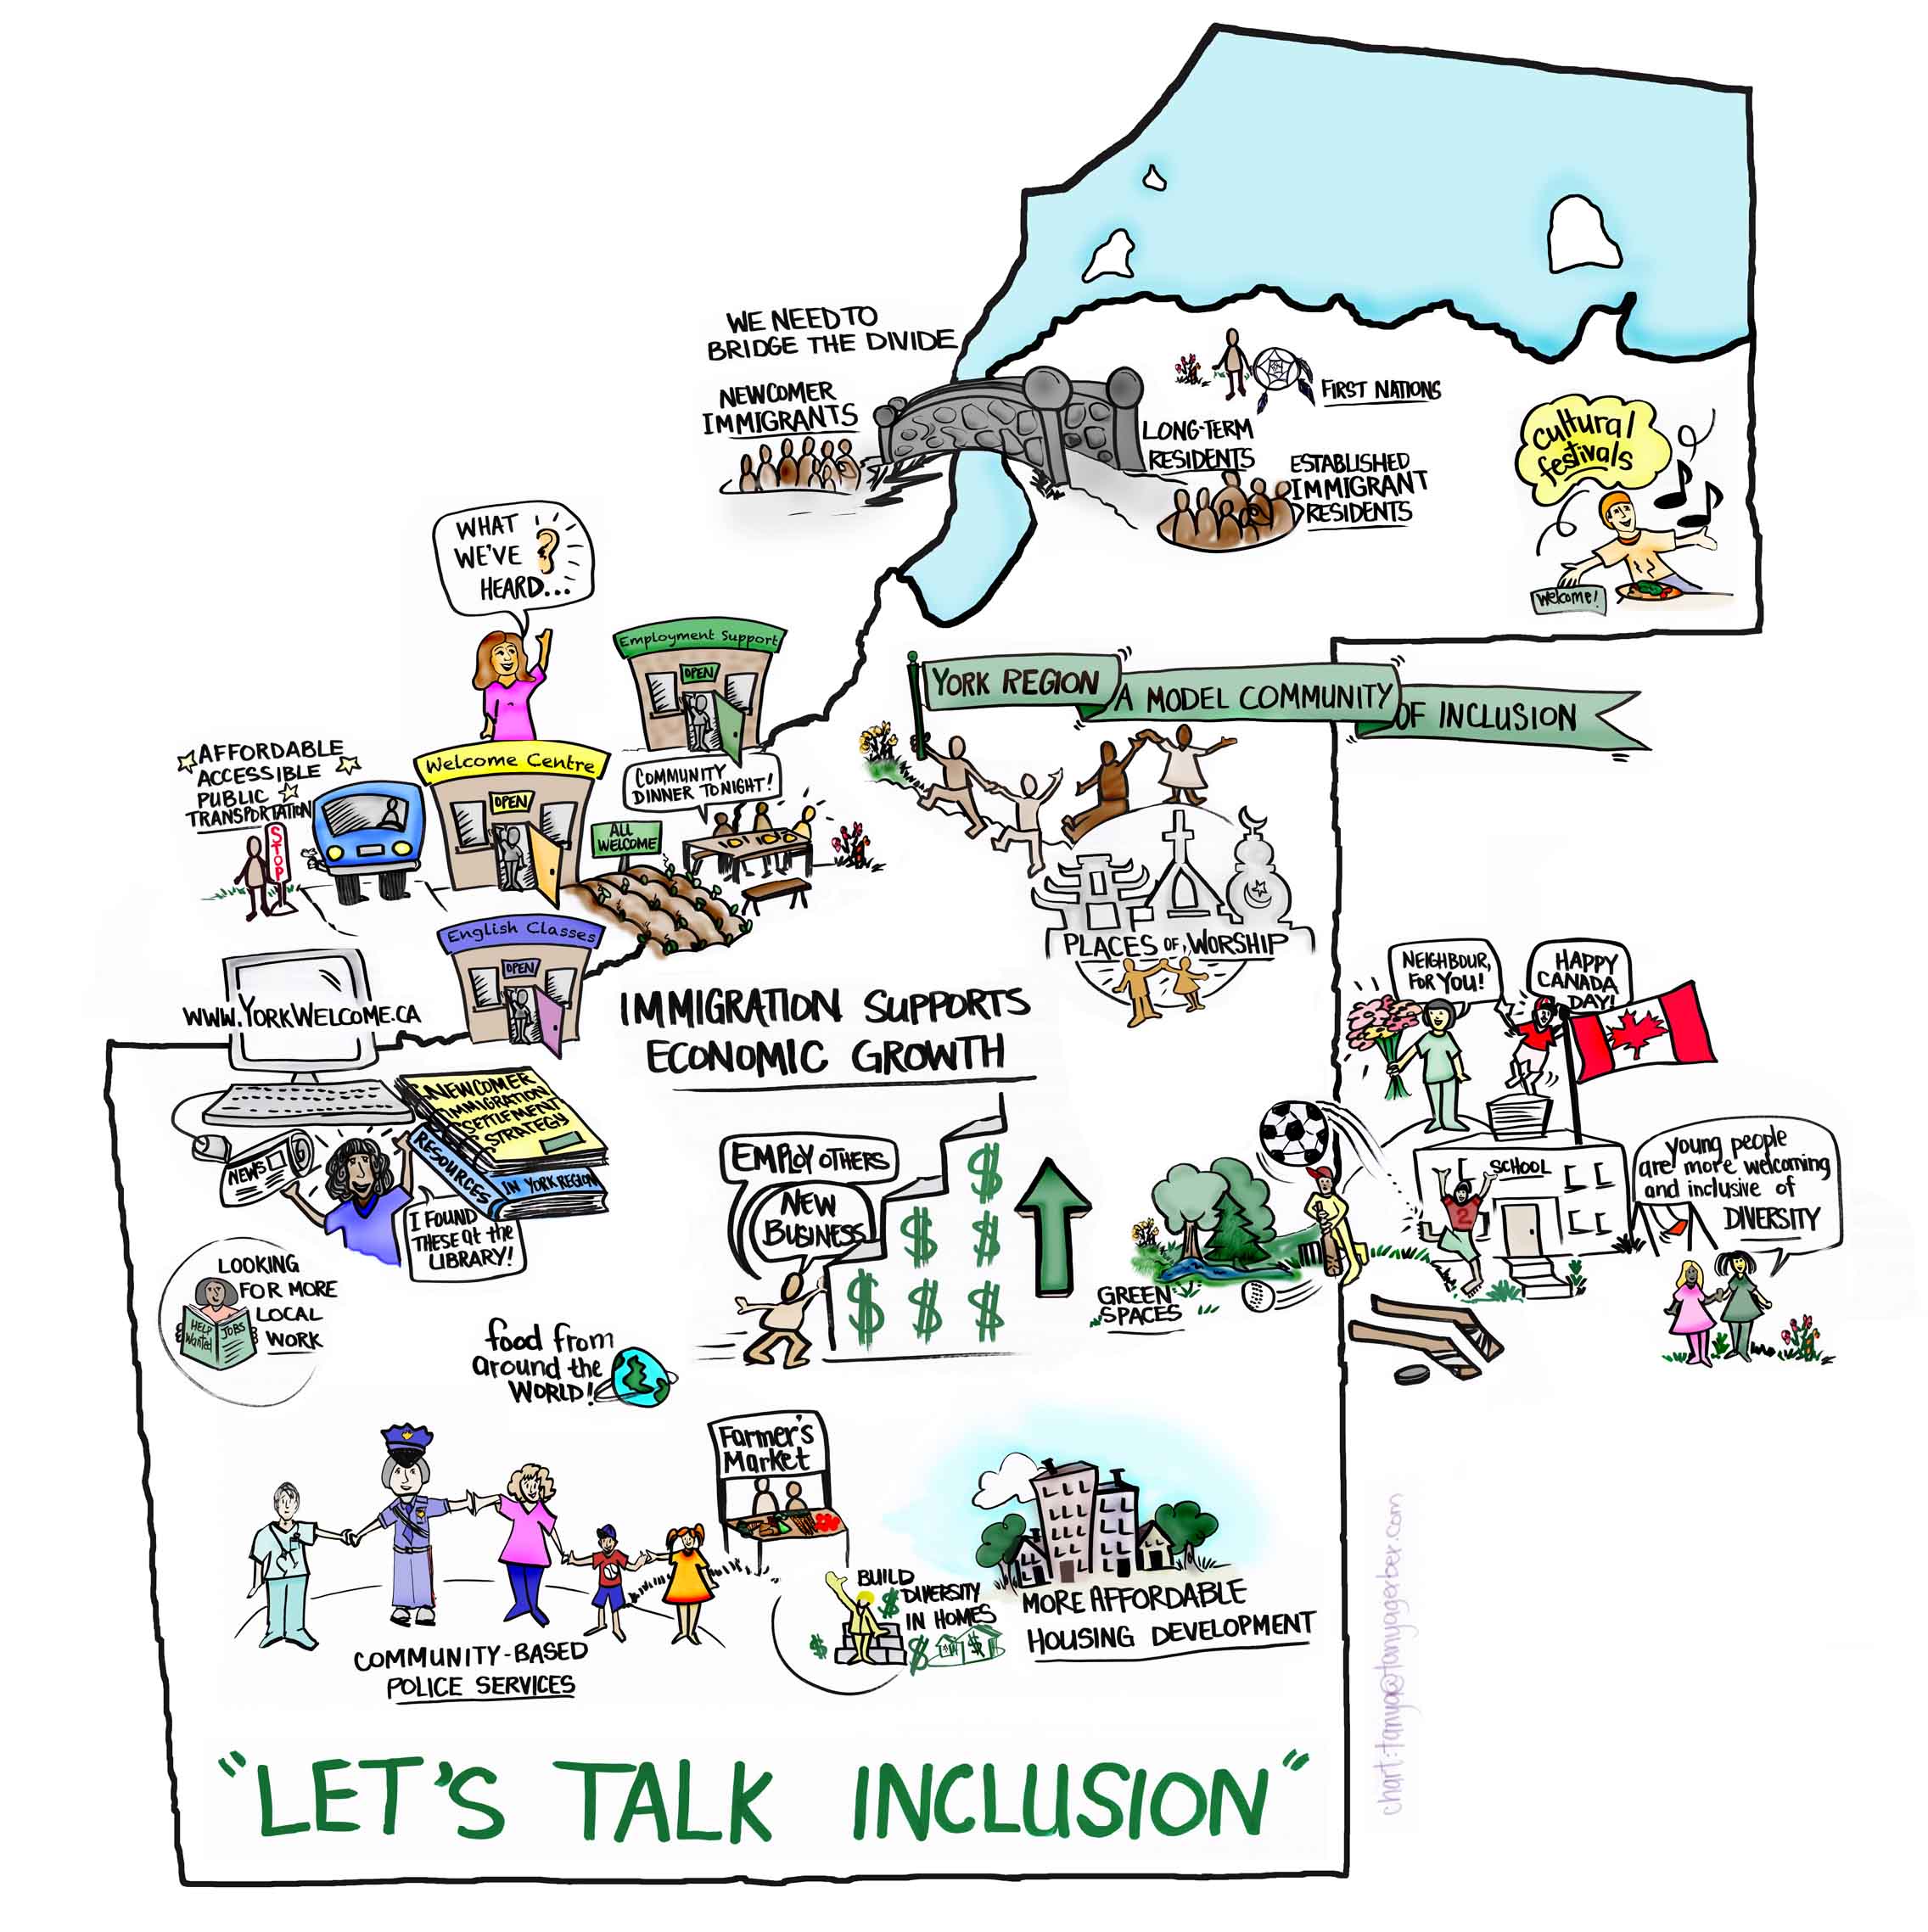 lets-talk-inclusion-image-for-print-small_edited-1